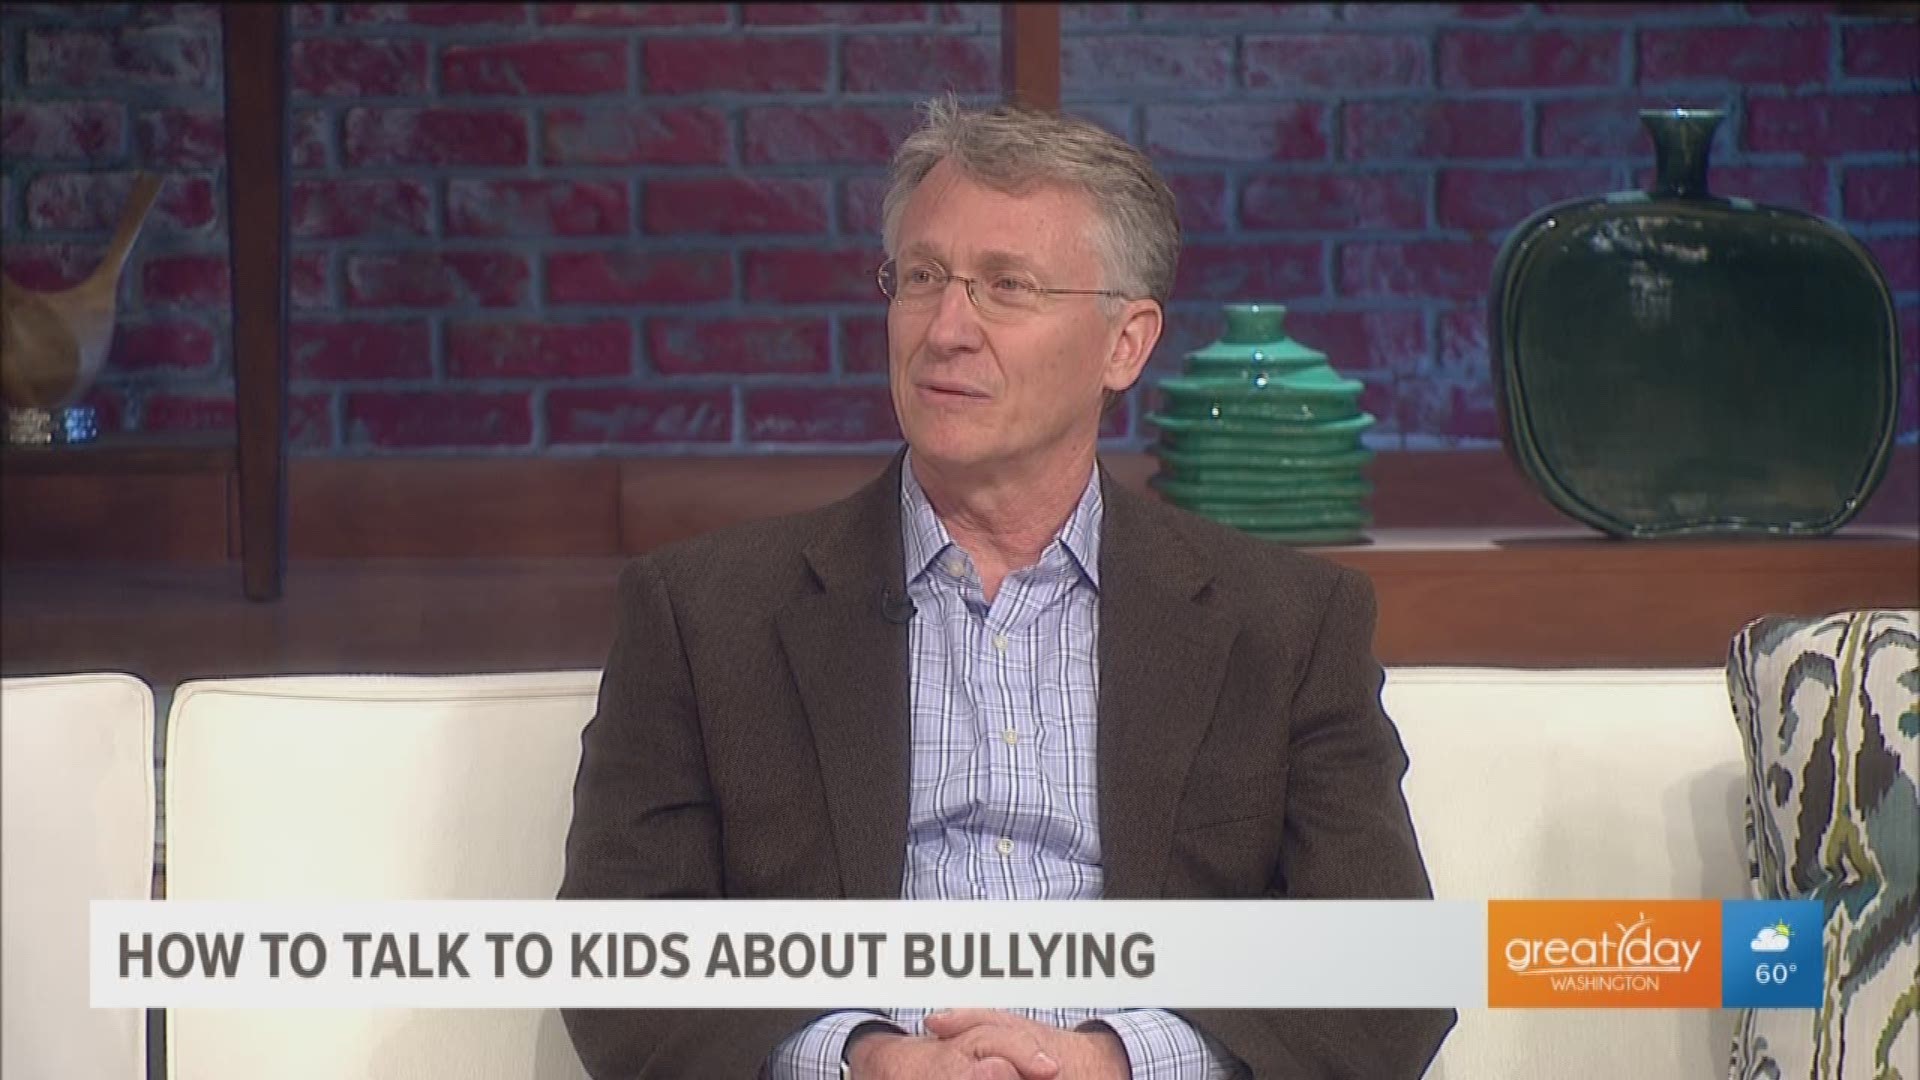 Clinical child and adolescent psychologist Dr. Daniel Hoover provides advice on how to talk with kids about bullying.